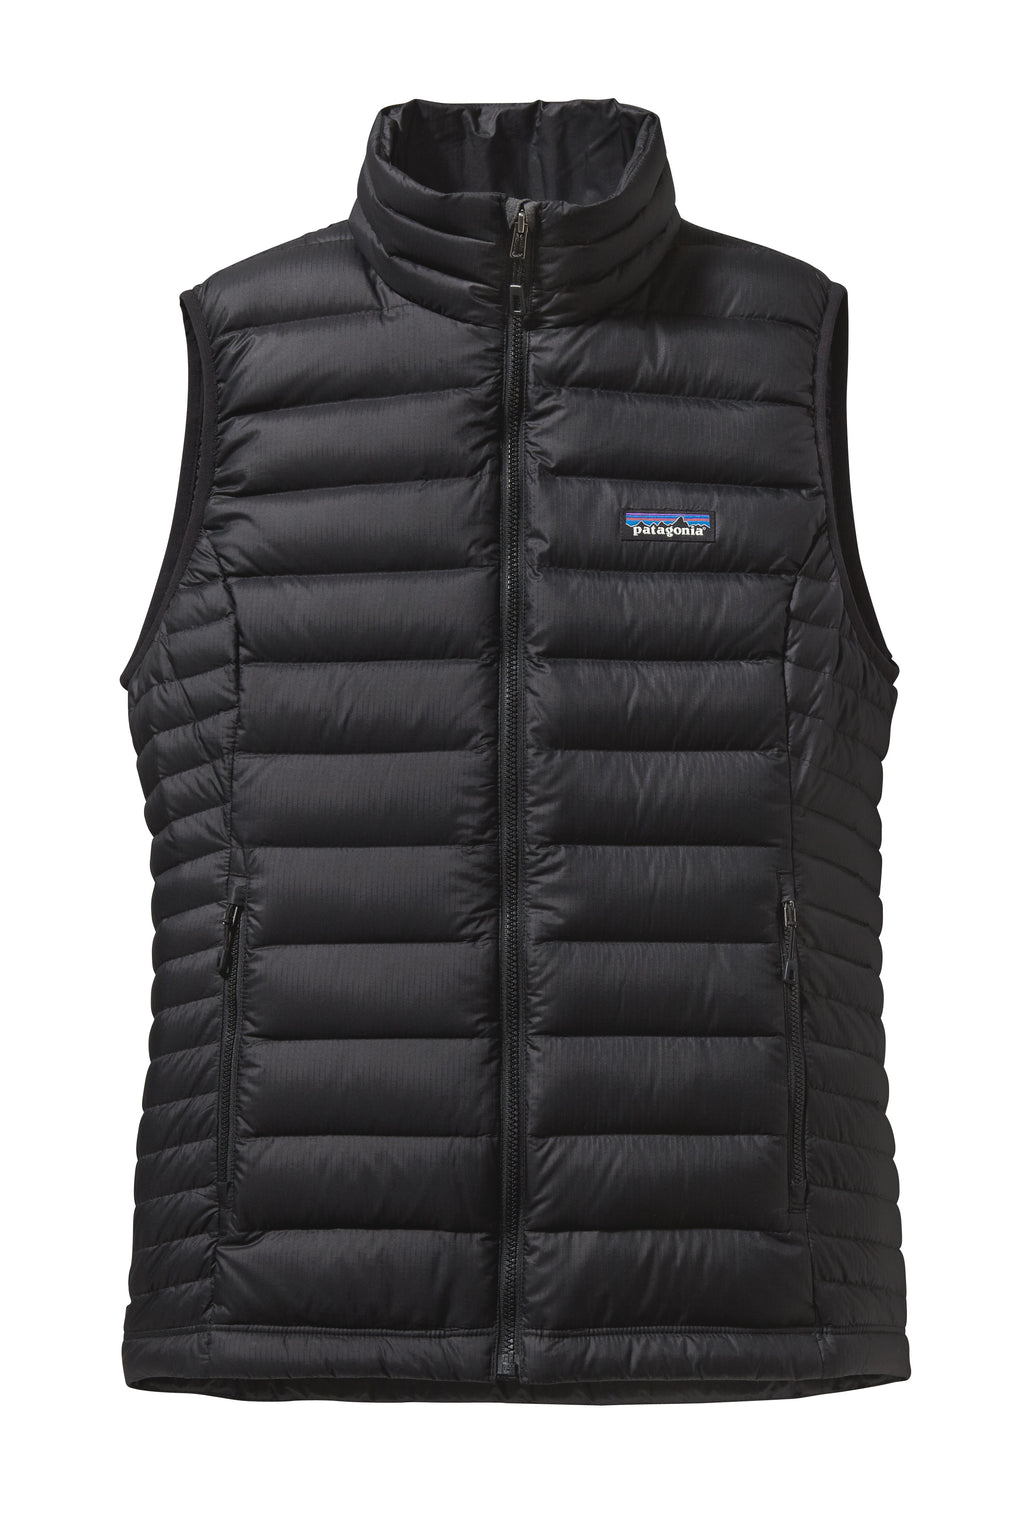 Patagonia Women's Down promotional Sweater Vest